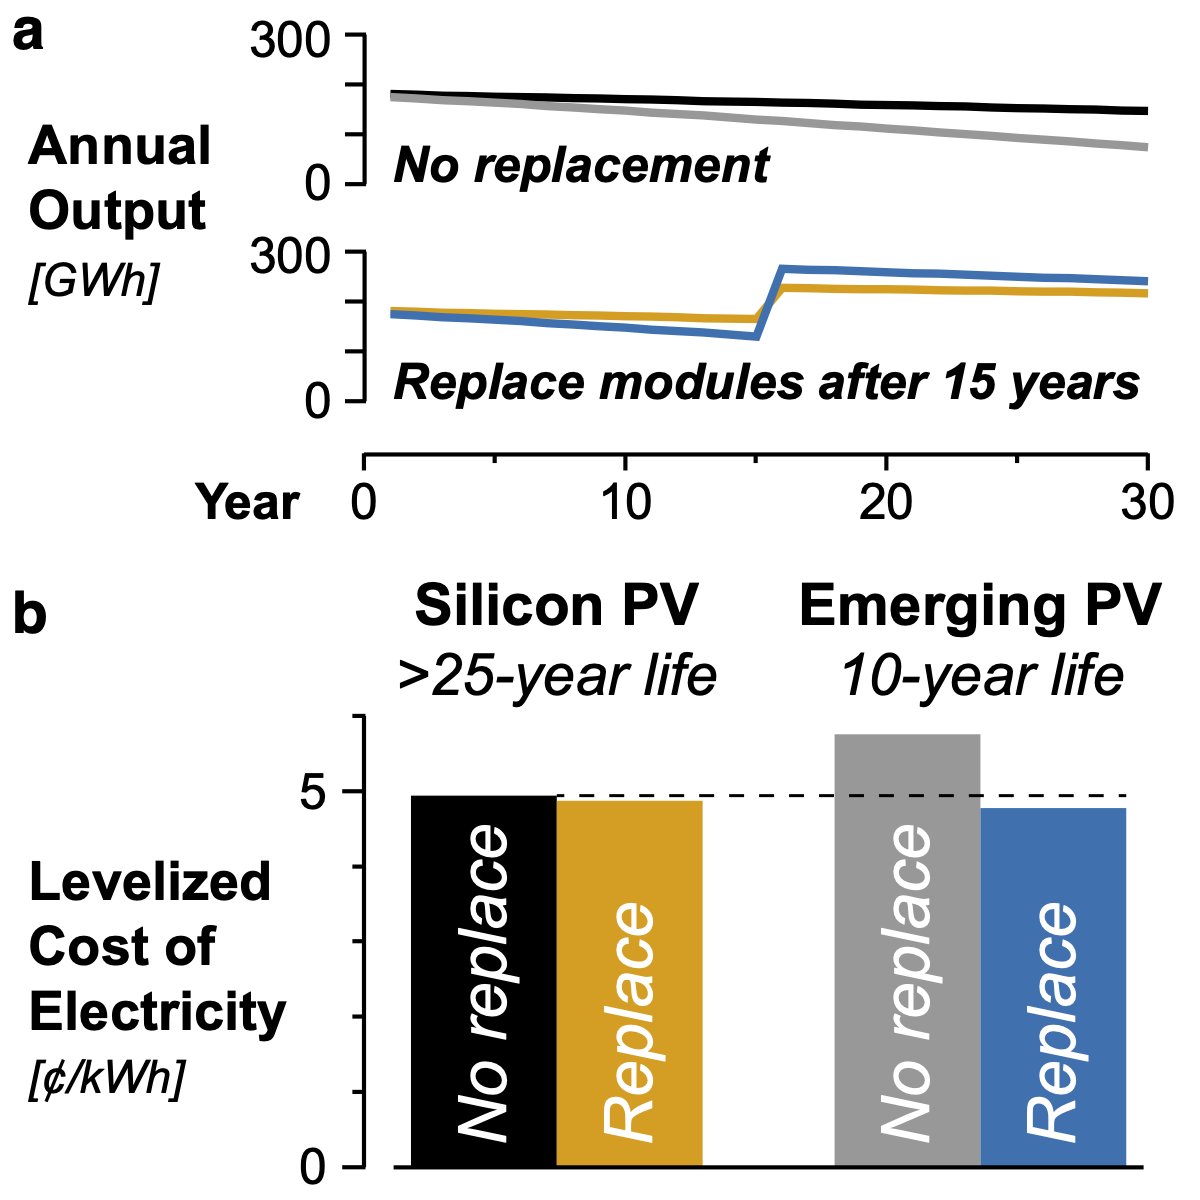 It will take years for new PV tech to prove 25 yr lifetimes in the field. But with today’s BOS-dominated cost structure, that may not be needed to enter the market. With module replacement, a short-lived, rapidly improving tech can be competitive on LCOE. https://doi.org/10.1016/j.joule.2019.08.012